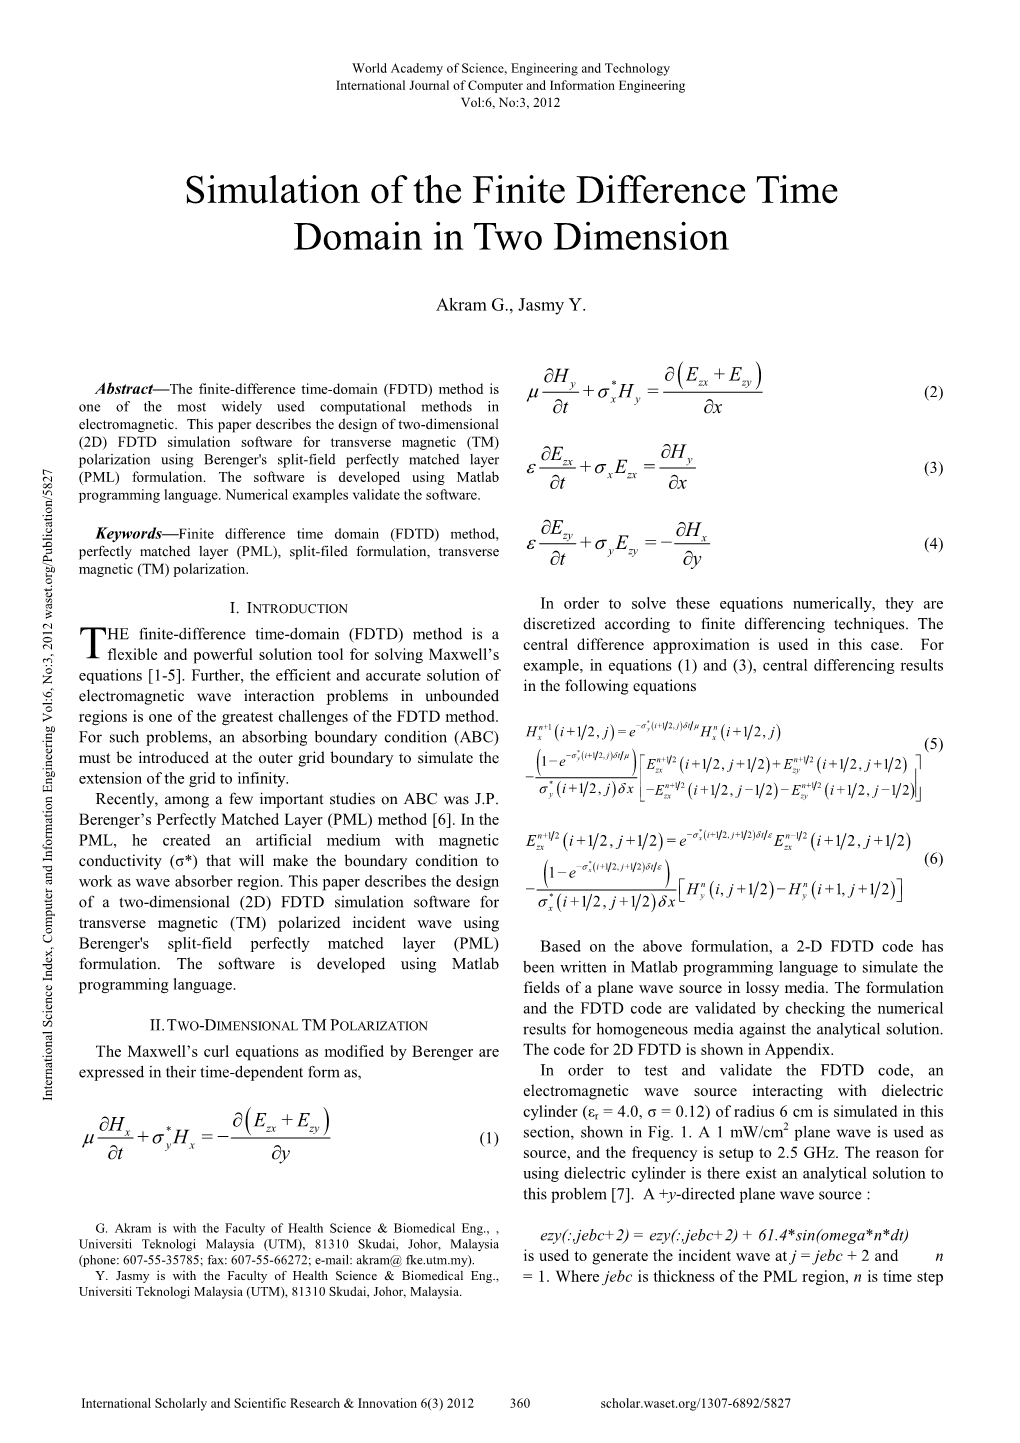 Simulation of the Finite Difference Time Domain in Two Dimension